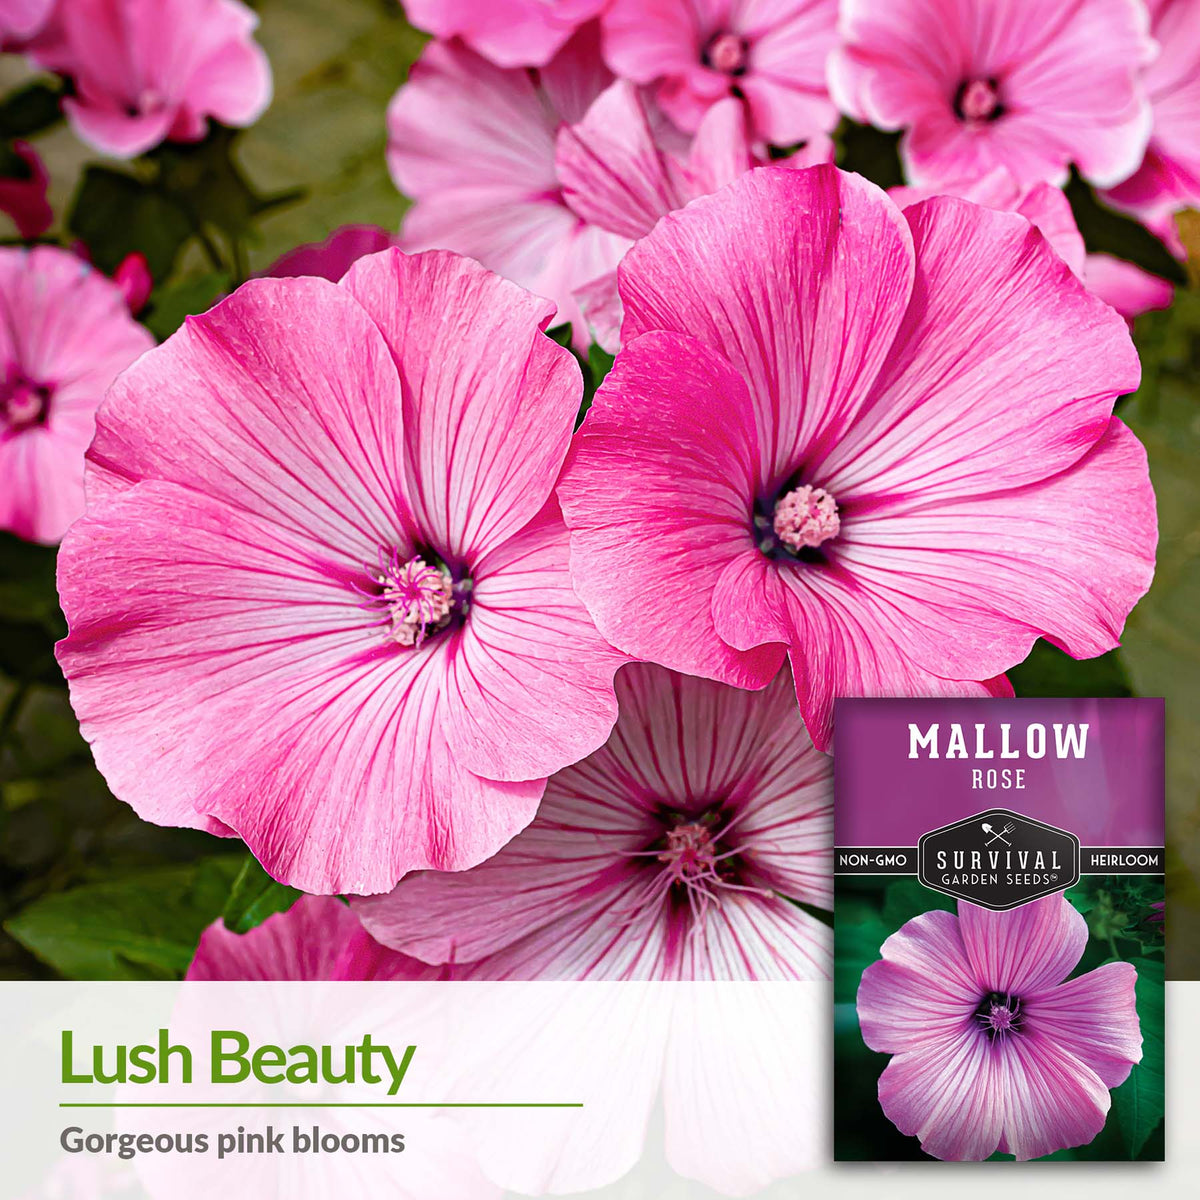 Rose Mallow has gorgeous pink blooms